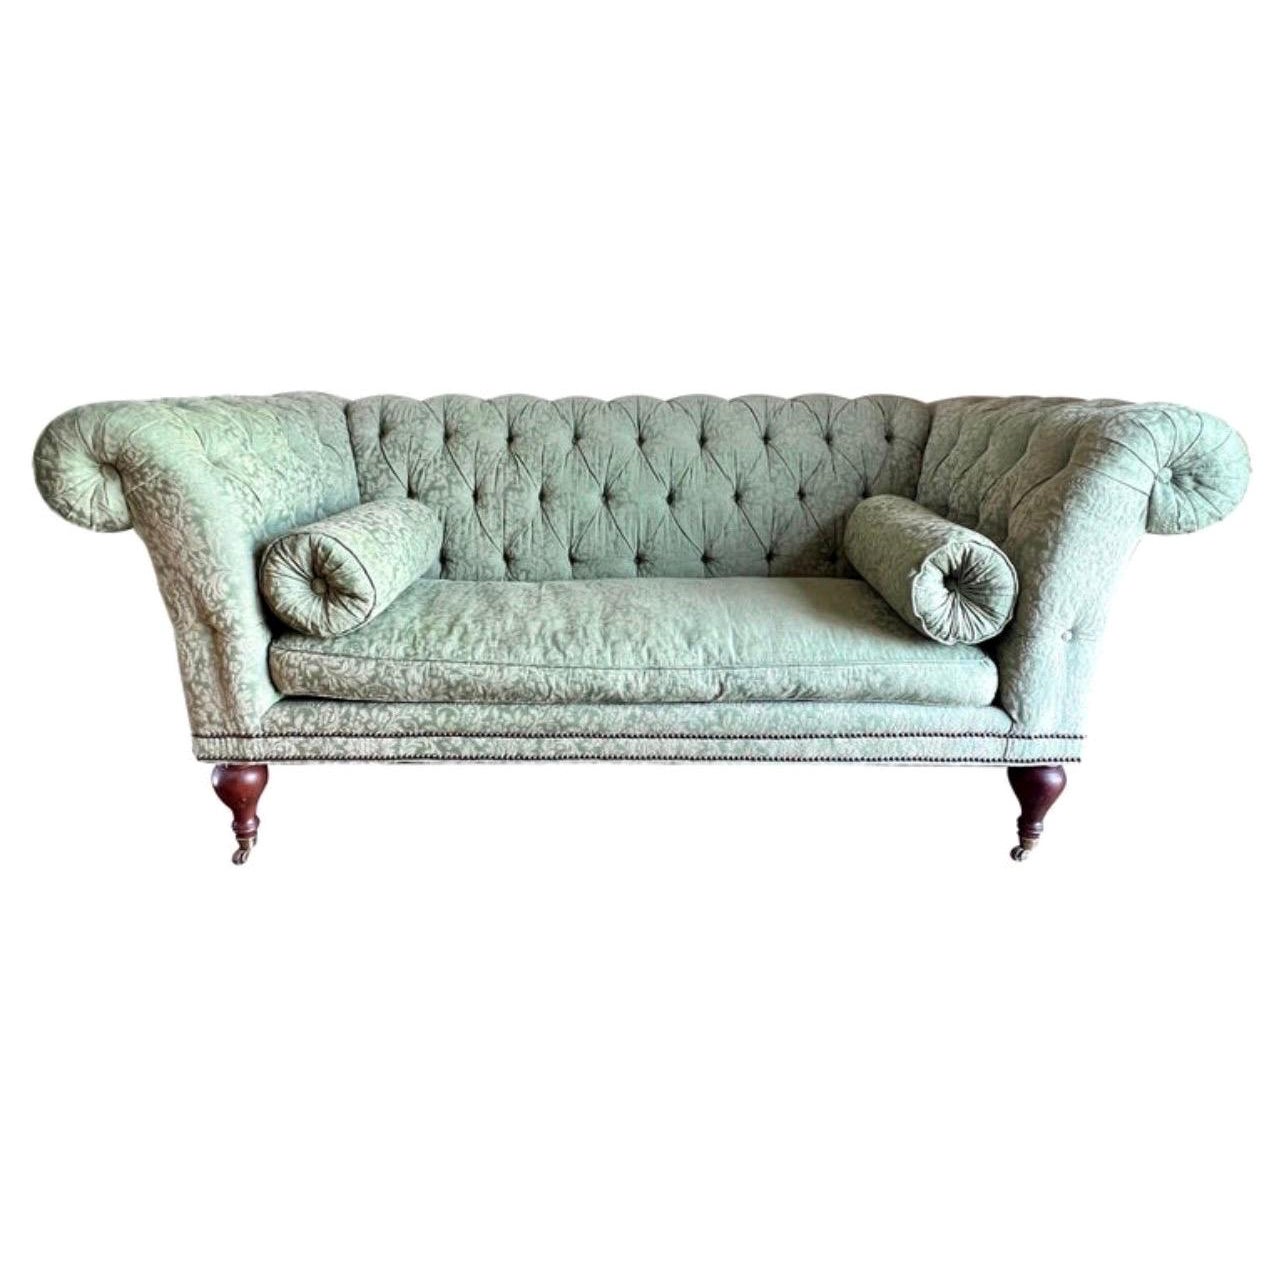 Drexel Tufted Scroll Arm Chesterfield Sofa for Lillian August For Sale